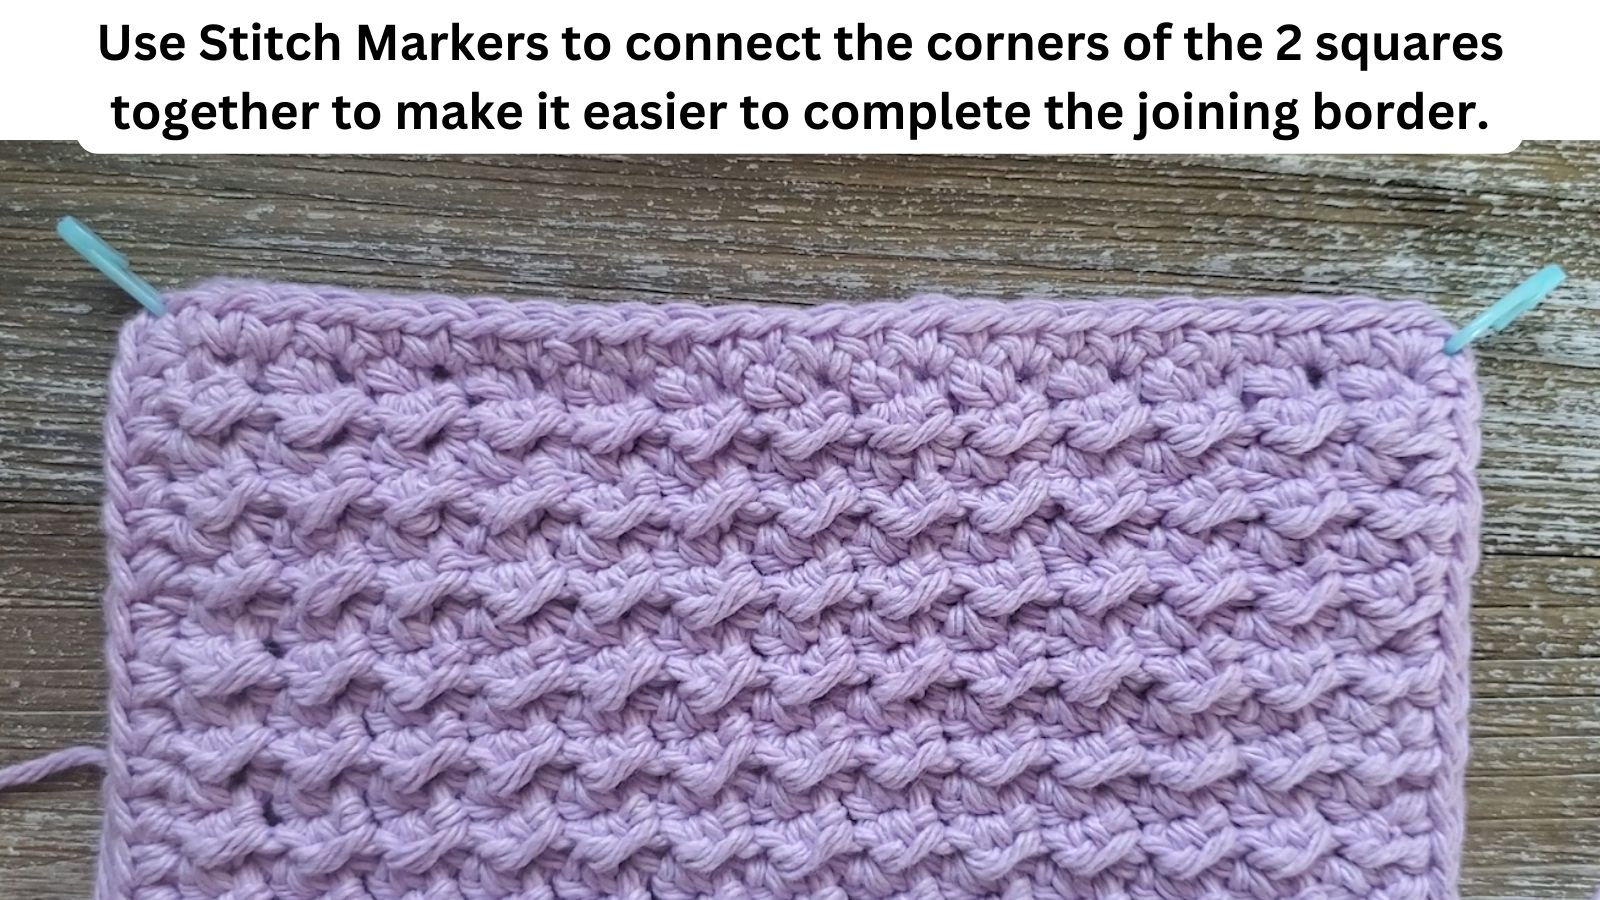 Use stitch markers in the corner stitches to join the 2 squares that make up the body of the potholder together.